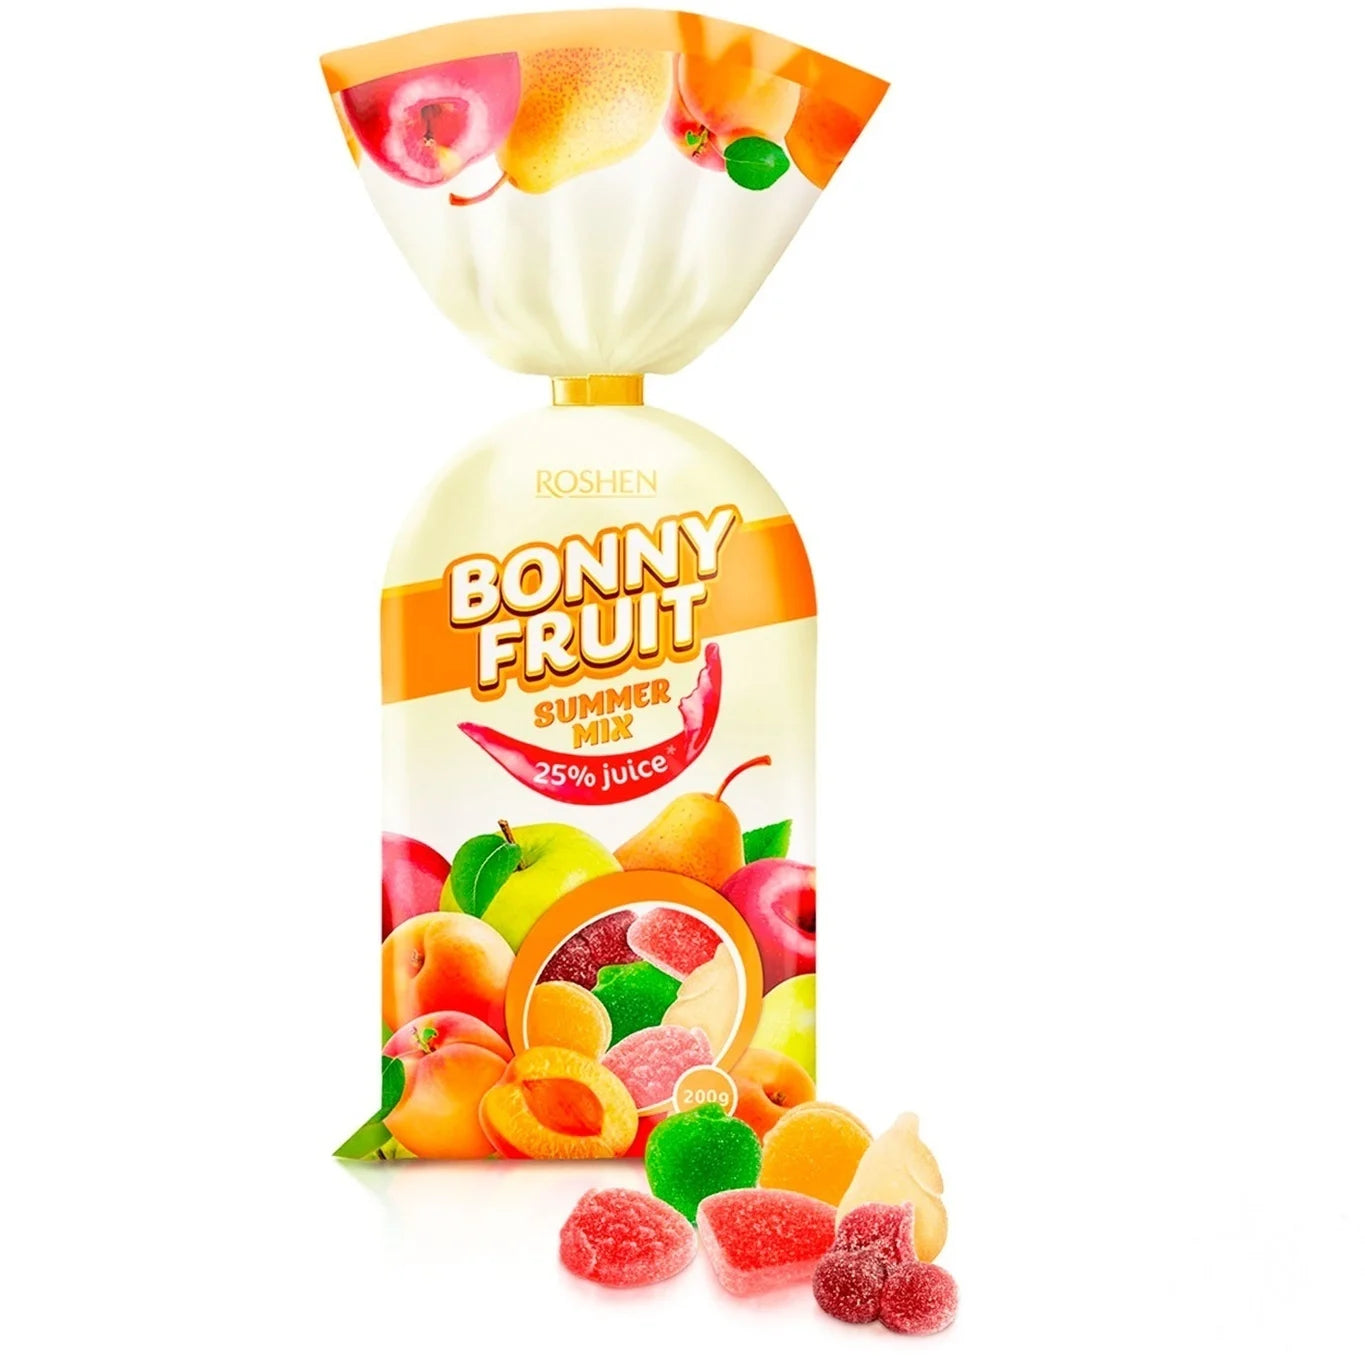 pack of Bonny Fruit Summer Mix Jelly Candy, 7oz